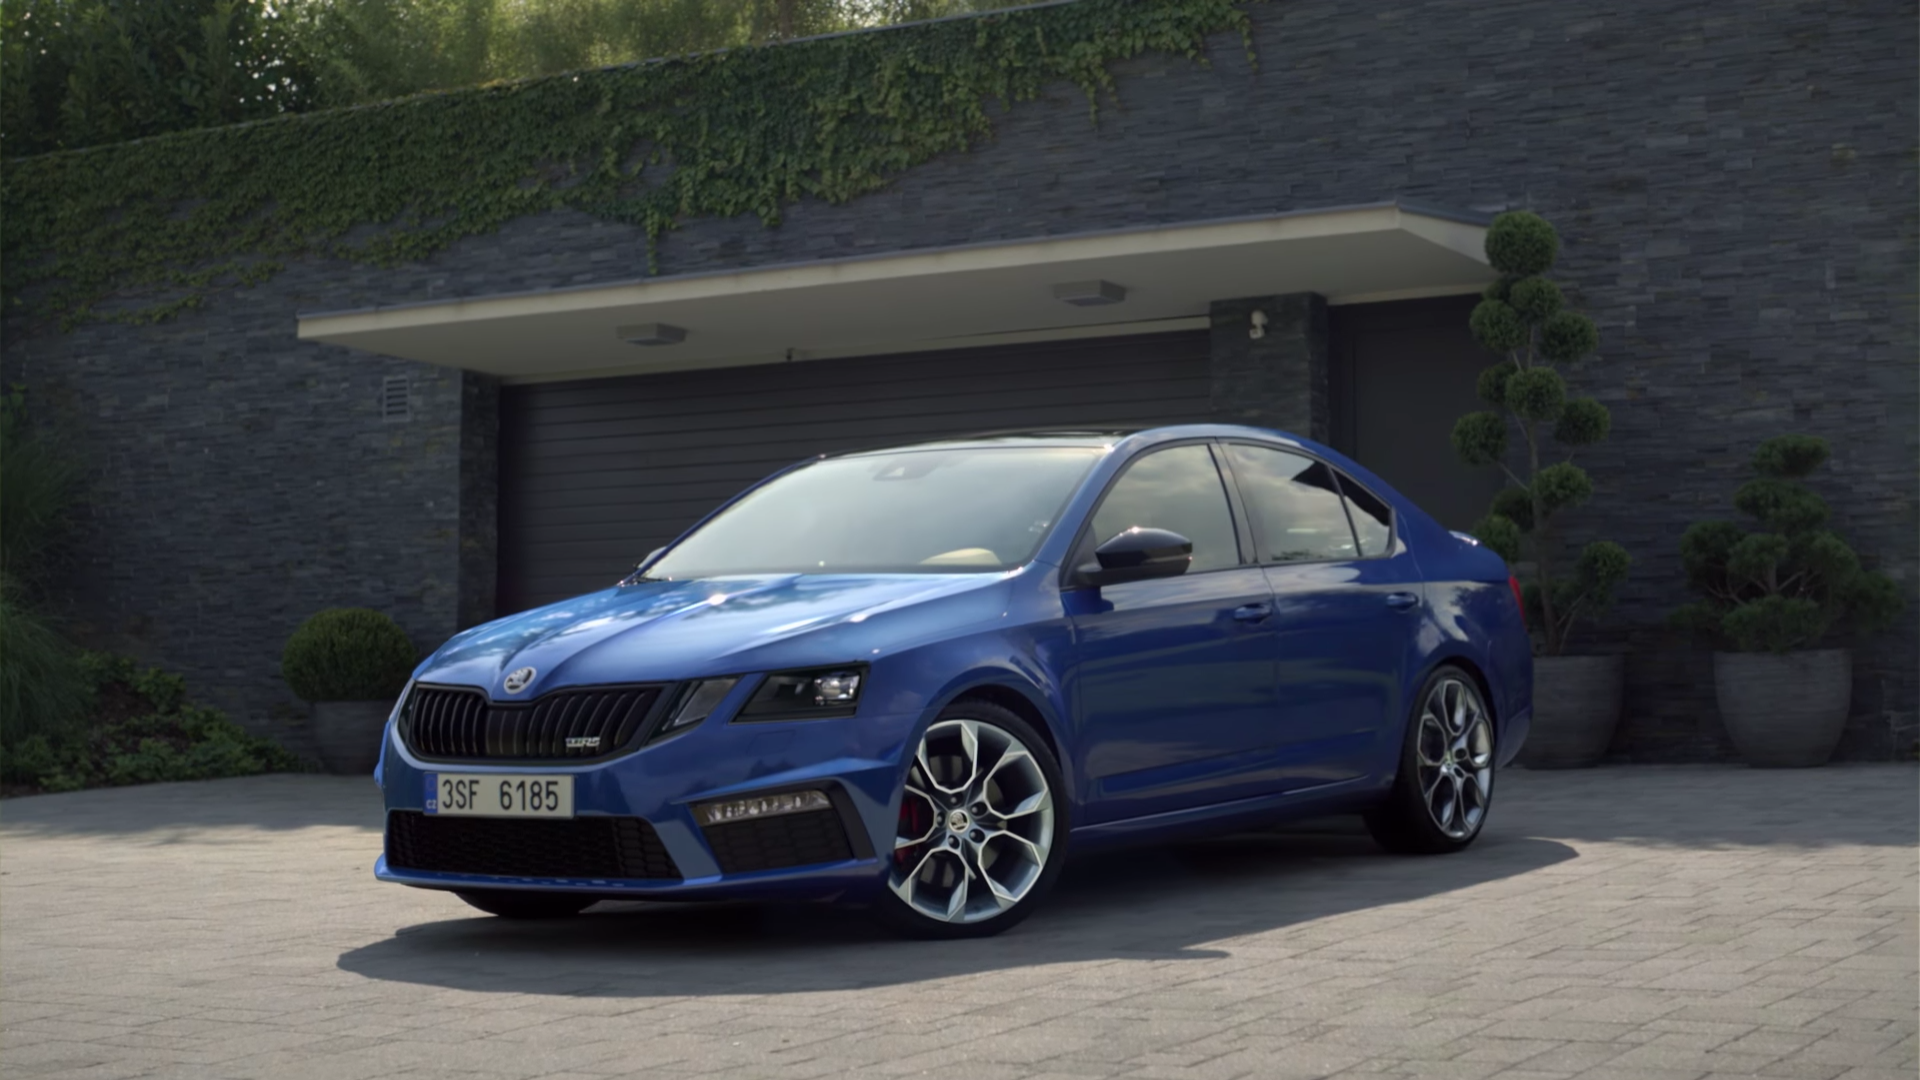 Skoda Octavia a7 RS. Skoda Octavia a7 FL RS. Skoda Octavia RS 2017.